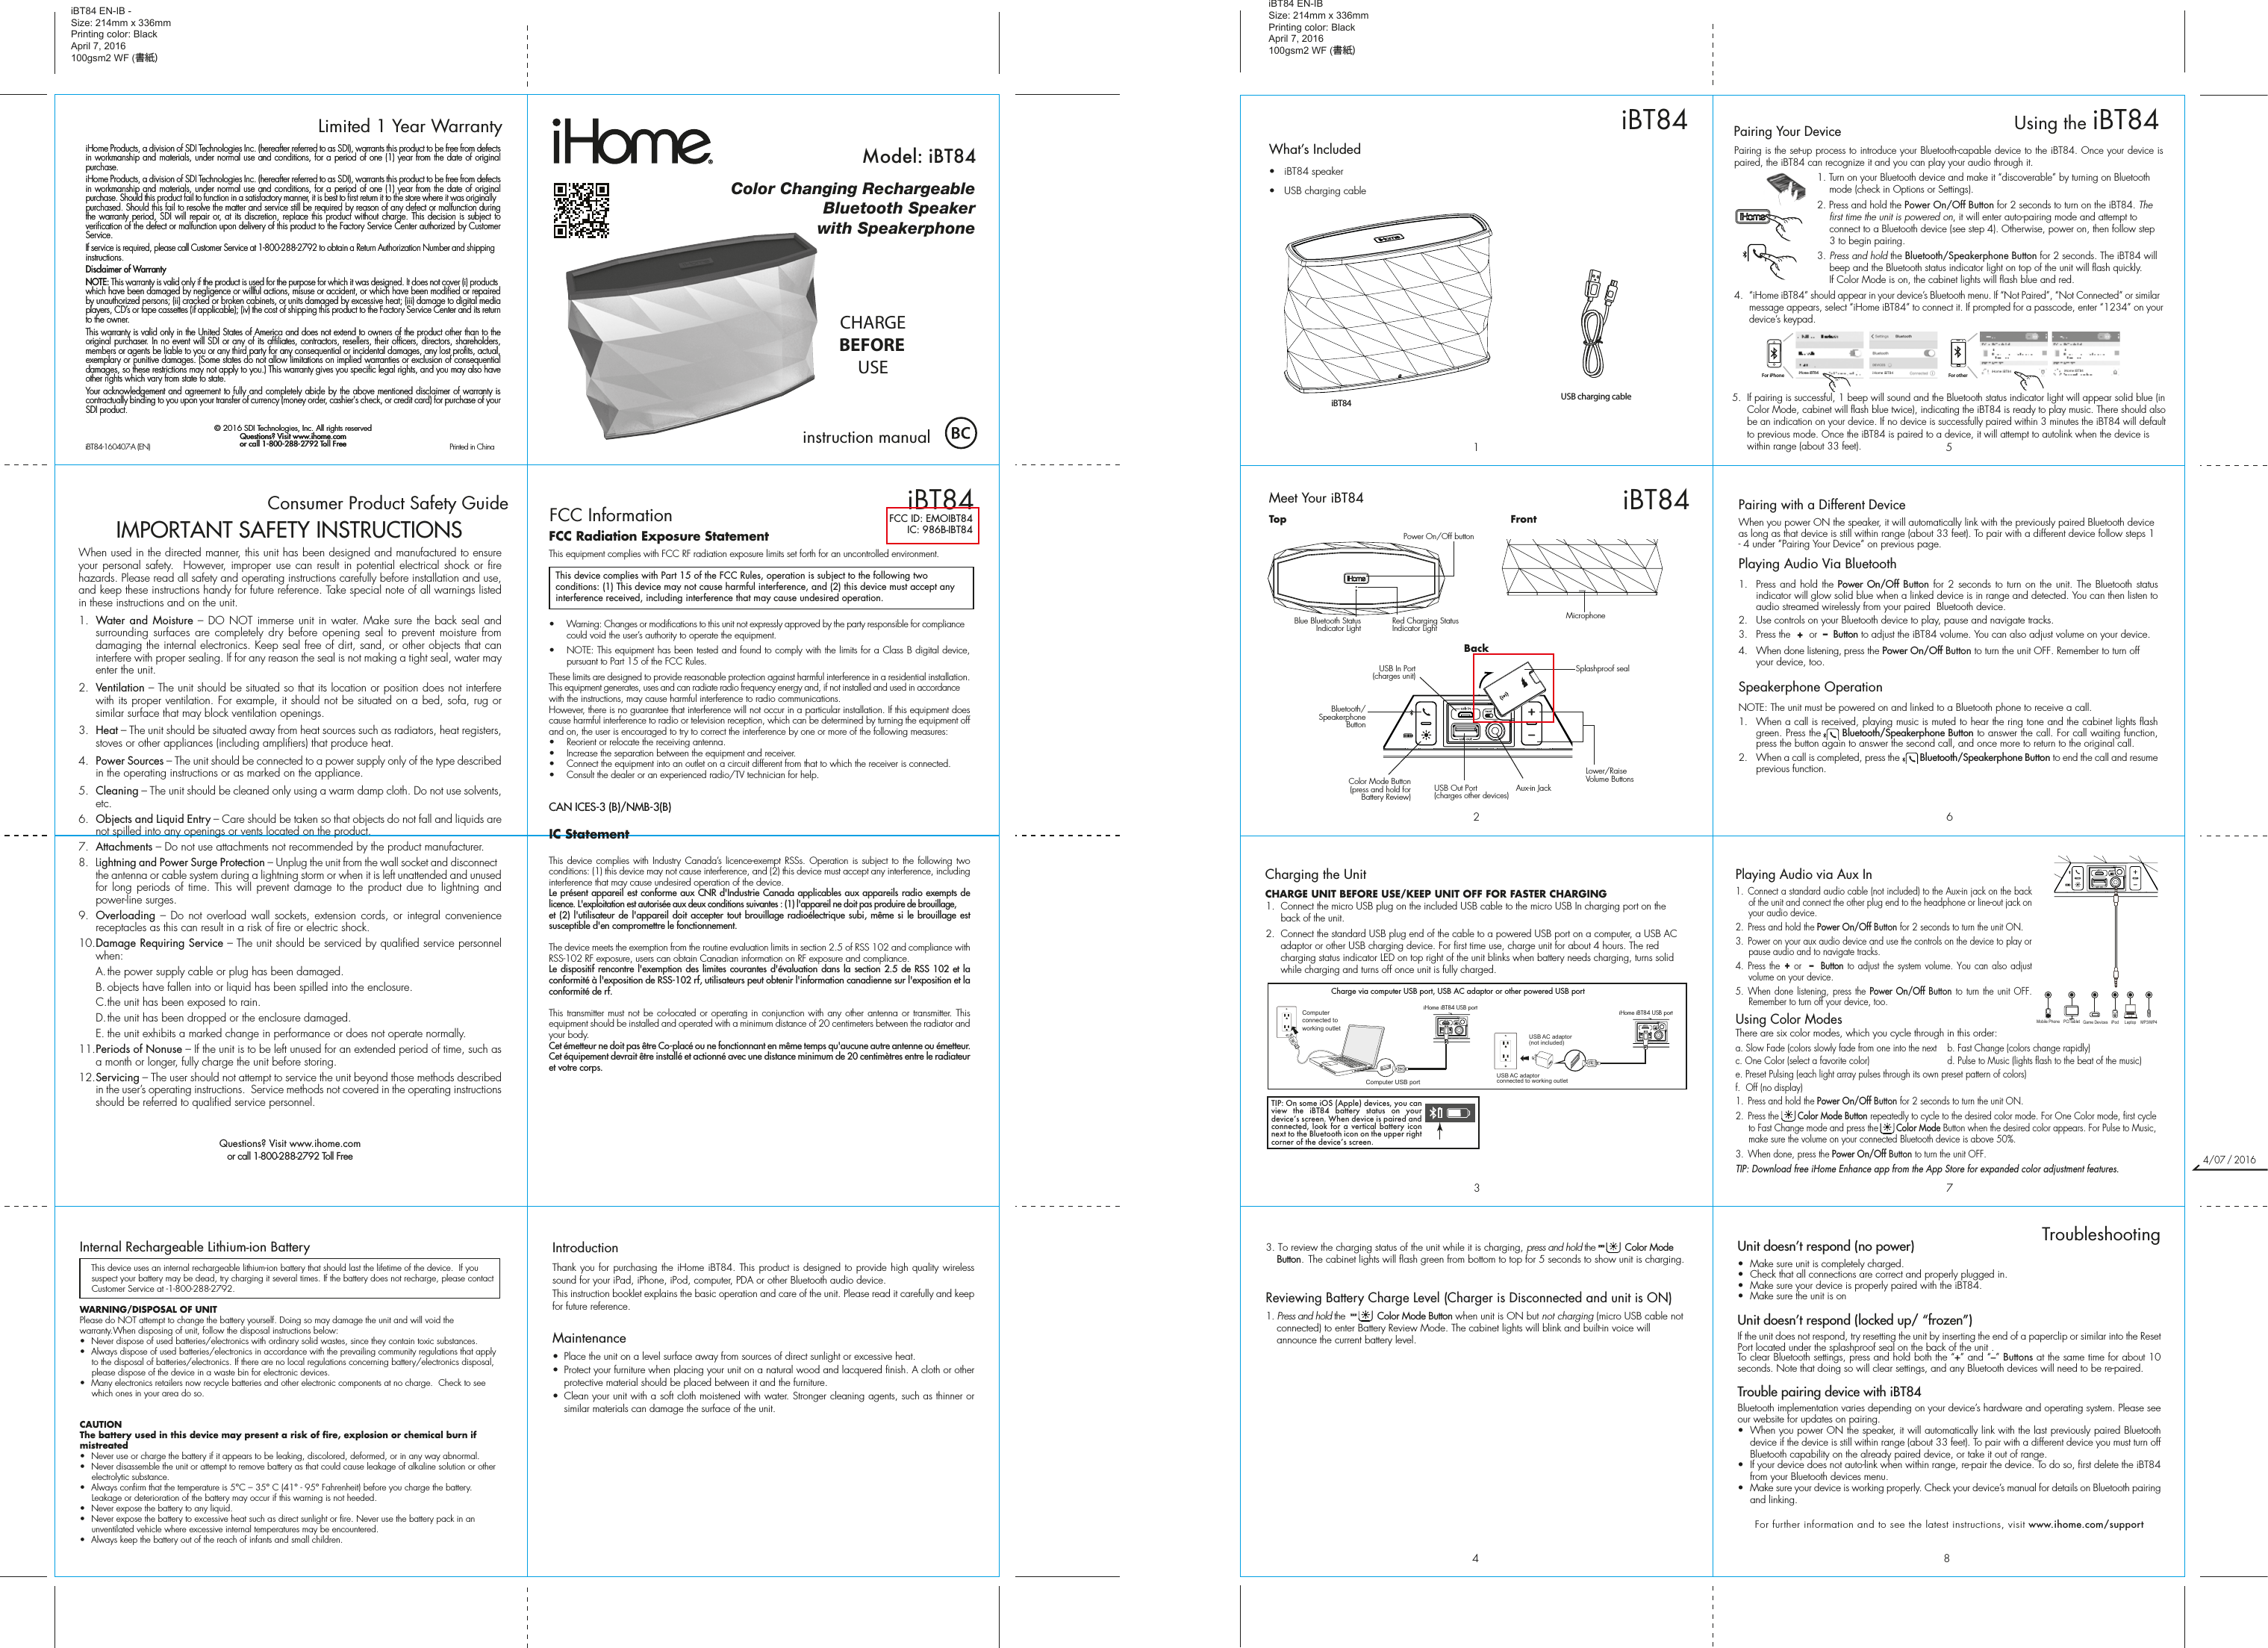 Thank you for purchasing the iHome iBT84. This product is designed to provide high quality wireless sound for your iPad, iPhone, iPod, computer, PDA or other Bluetooth audio device.This instruction booklet explains the basic operation and care of the unit. Please read it carefully and keep for future reference.Maintenance•  Place the unit on a level surface away from sources of direct sunlight or excessive heat.•  Protect your furniture when placing your unit on a natural wood and lacquered finish. A cloth or other protective material should be placed between it and the furniture.•  Clean your unit with a soft cloth moistened with water. Stronger cleaning agents, such as thinner or similar materials can damage the surface of the unit.iHome Products, a division of SDI Technologies Inc. (hereafter referred to as SDI), warrants this product to be free from defects in workmanship and materials, under normal use and conditions, for a period of one (1) year from the date of original purchase.iHome Products, a division of SDI Technologies Inc. (hereafter referred to as SDI), warrants this product to be free from defects in workmanship and materials, under normal use and conditions, for a period of one (1) year from the date of original purchase. Should this product fail to function in a satisfactory manner, it is best to first return it to the store where it was originally purchased. Should this fail to resolve the matter and service still be required by reason of any defect or malfunction during the warranty period, SDI will repair or, at its discretion, replace this product without charge. This decision is subject to verification of the defect or malfunction upon delivery of this product to the Factory Service Center authorized by Customer Service.If service is required, please call Customer Service at 1-800-288-2792 to obtain a Return Authorization Number and shipping instructions. Disclaimer of WarrantyNOTE: This warranty is valid only if the product is used for the purpose for which it was designed. It does not cover (i) products which have been damaged by negligence or willful actions, misuse or accident, or which have been modified or repaired by unauthorized persons; (ii) cracked or broken cabinets, or units damaged by excessive heat; (iii) damage to digital media players, CD’s or tape cassettes (if applicable); (iv) the cost of shipping this product to the Factory Service Center and its return to the owner.This warranty is valid only in the United States of America and does not extend to owners of the product other than to the original purchaser. In no event will SDI or any of its affiliates, contractors, resellers, their officers, directors, shareholders, members or agents be liable to you or any third party for any consequential or incidental damages, any lost profits, actual, exemplary or punitive damages. (Some states do not allow limitations on implied warranties or exclusion of consequential damages, so these restrictions may not apply to you.) This warranty gives you specific legal rights, and you may also have other rights which vary from state to state.Your acknowledgement and agreement to fully and completely abide by the above mentioned disclaimer of warranty is contractually binding to you upon your transfer of currency (money order, cashier&apos;s check, or credit card) for purchase of your SDI product.© 2016 SDI Technologies, Inc. All rights reservedQuestions? Visit www.ihome.comor call 1-800-288-2792 Toll FreeiHome Products, a division of SDI Technologies Inc. (hereafter referred to as SDI), warrants this product to be free from defects in workmanship and materials, under normal use and conditions, for a period of one (1) year from the date of original purchase.iHome Products, a division of SDI Technologies Inc. (hereafter referred to as SDI), warrants this product to be free from defects in workmanship and materials, under normal use and conditions, for a period of one (1) year from the date of original purchase. Should this product fail to function in a satisfactory manner, it is best to first return it to the store where it was originally purchased. Should this fail to resolve the matter and service still be required by reason of any defect or malfunction during the warranty period, SDI will repair or, at its discretion, replace this product without charge. This decision is subject to verification of the defect or malfunction upon delivery of this product to the Factory Service Center authorized by Customer Service.If service is required, please call Customer Service at 1-800-288-2792 to obtain a Return Authorization Number and shipping instructions. Disclaimer of WarrantyNOTE: This warranty is valid only if the product is used for the purpose for which it was designed. It does not cover (i) products which have been damaged by negligence or willful actions, misuse or accident, or which have been modified or repaired by unauthorized persons; (ii) cracked or broken cabinets, or units damaged by excessive heat; (iii) damage to digital media players, CD’s or tape cassettes (if applicable); (iv) the cost of shipping this product to the Factory Service Center and its return to the owner.This warranty is valid only in the United States of America and does not extend to owners of the product other than to the original purchaser. In no event will SDI or any of its affiliates, contractors, resellers, their officers, directors, shareholders, members or agents be liable to you or any third party for any consequential or incidental damages, any lost profits, actual, exemplary or punitive damages. (Some states do not allow limitations on implied warranties or exclusion of consequential damages, so these restrictions may not apply to you.) This warranty gives you specific legal rights, and you may also have other rights which vary from state to state.Your acknowledgement and agreement to fully and completely abide by the above mentioned disclaimer of warranty is contractually binding to you upon your transfer of currency (money order, cashier&apos;s check, or credit card) for purchase of your SDI product.© 2016 SDI Technologies, Inc. All rights reservedQuestions? Visit www.ihome.comor call 1-800-288-2792 Toll FreeLimited 1 Year WarrantyiBT84 EN-IB -Size: 214mm x 336mmPrinting color: BlackApril 7, 2016100gsm2 WF (書紙)9Consumer Product Safety Guide8When used in the directed manner, this unit has been designed and manufactured to ensure your personal safety.  However, improper use can result in potential electrical shock or fire hazards. Please read all safety and operating instructions carefully before installation and use, and keep these instructions handy for future reference. Take special note of all warnings listed in these instructions and on the unit. 1.   Water and Moisture – DO NOT immerse unit in water. Make sure the back seal and surrounding surfaces are completely dry before opening seal to prevent moisture from damaging the internal electronics. Keep seal free of dirt, sand, or other objects that can interfere with proper sealing. If for any reason the seal is not making a tight seal, water may enter the unit.2.   Ventilation – The unit should be situated so that its location or position does not interfere with its proper ventilation. For example, it should not be situated on a bed, sofa, rug or similar surface that may block ventilation openings.  3.   Heat – The unit should be situated away from heat sources such as radiators, heat registers, stoves or other appliances (including amplifiers) that produce heat.4.   Power Sources – The unit should be connected to a power supply only of the type described in the operating instructions or as marked on the appliance.5.   Cleaning – The unit should be cleaned only using a warm damp cloth. Do not use solvents, etc.  6.  Objects and Liquid Entry – Care should be taken so that objects do not fall and liquids are not spilled into any openings or vents located on the product.7.  Attachments – Do not use attachments not recommended by the product manufacturer.8.  Lightning and Power Surge Protection – Unplug the unit from the wall socket and disconnect the antenna or cable system during a lightning storm or when it is left unattended and unused for long periods of time. This will prevent damage to the product due to lightning and power-line surges.9.  Overloading – Do not overload wall sockets, extension cords, or integral convenience receptacles as this can result in a risk of fire or electric shock.10. Damage Requiring Service – The unit should be serviced by qualified service personnel when:  A. the power supply cable or plug has been damaged.  B. objects have fallen into or liquid has been spilled into the enclosure.  C. the unit has been exposed to rain.  D. the unit has been dropped or the enclosure damaged.  E. the unit exhibits a marked change in performance or does not operate normally.11. Periods of Nonuse – If the unit is to be left unused for an extended period of time, such as a month or longer, fully charge the unit before storing.12. Servicing – The user should not attempt to service the unit beyond those methods described in the user’s operating instructions.  Service methods not covered in the operating instructions should be referred to qualified service personnel. Questions? Visit www.ihome.comor call 1-800-288-2792 Toll FreeIMPORTANT SAFETY INSTRUCTIONSInternal Rechargeable Lithium-ion Battery   This device uses an internal rechargeable lithium-ion battery that should last the lifetime of the device.  If you suspect your battery may be dead, try charging it several times. If the battery does not recharge, please contact Customer Service at -1-800-288-2792. WARNING/DISPOSAL OF UNITPlease do NOT attempt to change the battery yourself. Doing so may damage the unit and will void the warranty.When disposing of unit, follow the disposal instructions below:•  Never dispose of used batteries/electronics with ordinary solid wastes, since they contain toxic substances. •  Always dispose of used batteries/electronics in accordance with the prevailing community regulations that apply to the disposal of batteries/electronics. If there are no local regulations concerning battery/electronics disposal, please dispose of the device in a waste bin for electronic devices.•  Many electronics retailers now recycle batteries and other electronic components at no charge.  Check to see which ones in your area do so.CAUTIONThe battery used in this device may present a risk of fire, explosion or chemical burn if mistreated•  Never use or charge the battery if it appears to be leaking, discolored, deformed, or in any way abnormal.•  Never disassemble the unit or attempt to remove battery as that could cause leakage of alkaline solution or other electrolytic substance.•  Always confirm that the temperature is 5°C – 35° C (41° - 95° Fahrenheit) before you charge the battery. Leakage or deterioration of the battery may occur if this warning is not heeded.•  Never expose the battery to any liquid.•  Never expose the battery to excessive heat such as direct sunlight or fire. Never use the battery pack in an unventilated vehicle where excessive internal temperatures may be encountered.•  Always keep the battery out of the reach of infants and small children.IntroductioniBT84-160407-A (EN)                                             Printed in ChinaPairing with a Different DeviceWhen you power ON the speaker, it will automatically link with the previously paired Bluetooth device as long as that device is still within range (about 33 feet). To pair with a different device follow steps 1 - 4 under ”Pairing Your Device” on previous page.Playing Audio Via Bluetooth 1. Press and hold the Power On/Off Button for 2 seconds to turn on the unit. The Bluetooth status indicator will glow solid blue when a linked device is in range and detected. You can then listen to audio streamed wirelessly from your paired  Bluetooth device.2.  Use controls on your Bluetooth device to play, pause and navigate tracks. 3.  Press the  +  or  –  Button to adjust the iBT84 volume. You can also adjust volume on your device. 4.  When done listening, press the Power On/Off Button to turn the unit OFF. Remember to turn off your device, too.Speakerphone OperationNOTE: The unit must be powered on and linked to a Bluetooth phone to receive a call.1.  When a call is received, playing music is muted to hear the ring tone and the cabinet lights flash green. Press the      Bluetooth/Speakerphone Button to answer the call. For call waiting function, press the button again to answer the second call, and once more to return to the original call.2.  When a call is completed, press the        Bluetooth/Speakerphone Button to end the call and resume previous function.Color Changing RechargeableBluetooth Speakerwith Speakerphoneinstruction manualModel: iBT84CHARGEBEFOREUSEiBT84FCC ID: EMOIBT84IC: 986B-IBT84iBT84 EN-IBSize: 214mm x 336mmPrinting color: BlackApril 7, 2016100gsm2 WF (書紙)What’s Included •  iBT84 speaker•  USB charging cableiBT84867513Unit doesn’t respond (no power) •  Make sure unit is completely charged. •  Check that all connections are correct and properly plugged in. •  Make sure your device is properly paired with the iBT84.•  Make sure the unit is onUnit doesn’t respond (locked up/ “frozen”)If the unit does not respond, try resetting the unit by inserting the end of a paperclip or similar into the Reset Port located under the splashproof seal on the back of the unit .To clear Bluetooth settings, press and hold both the “+” and “–” Buttons at the same time for about 10 seconds. Note that doing so will clear settings, and any Bluetooth devices will need to be re-paired.Trouble pairing device with iBT84Bluetooth implementation varies depending on your device’s hardware and operating system. Please see our website for updates on pairing. •  When you power ON the speaker, it will automatically link with the last previously paired Bluetooth   device if the device is still within range (about 33 feet). To pair with a different device you must turn off Bluetooth capability on the already paired device, or take it out of range.•  If your device does not auto-link when within range, re-pair the device. To do so, first delete the iBT84    from your Bluetooth devices menu. •  Make sure your device is working properly. Check your device’s manual for details on Bluetooth pairing and linking. For further information and to see the latest instructions, visit www.ihome.com/support8TroubleshootingCharging the UnitCHARGE UNIT BEFORE USE/KEEP UNIT OFF FOR FASTER CHARGING1.  Connect the micro USB plug on the included USB cable to the micro USB In charging port on the back of the unit. 2.  Connect the standard USB plug end of the cable to a powered USB port on a computer, a USB AC adaptor or other USB charging device. For first time use, charge unit for about 4 hours. The red charging status indicator LED on top right of the unit blinks when battery needs charging, turns solid while charging and turns off once unit is fully charged.iHome iBT84 USB portCharge via computer USB port, USB AC adaptor or other powered USB portComputer USB portComputer connected to working outletUSB AC adaptor(not included)USB AC adaptor connected to working outletPairing is the set-up process to introduce your Bluetooth-capable device to the iBT84. Once your device is paired, the iBT84 can recognize it and you can play your audio through it. 1. Turn on your Bluetooth device and make it “discoverable” by turning on Bluetooth mode (check in Options or Settings).2. Press and hold the Power On/Off Button for 2 seconds to turn on the iBT84. The first time the unit is powered on, it will enter auto-pairing mode and attempt to connect to a Bluetooth device (see step 4). Otherwise, power on, then follow step 3 to begin pairing.3.  Press and hold the Bluetooth/Speakerphone Button for 2 seconds. The iBT84 will beep and the Bluetooth status indicator light on top of the unit will flash quickly.If Color Mode is on, the cabinet lights will flash blue and red. 4.  “iHome iBT84” should appear in your device’s Bluetooth menu. If “Not Paired”, “Not Connected” or similar message appears, select “iHome iBT84” to connect it. If prompted for a passcode, enter “1234” on your device’s keypad.Using the iBT84iBT845.  If pairing is successful, 1 beep will sound and the Bluetooth status indicator light will appear solid blue (in Color Mode, cabinet will flash blue twice), indicating the iBT84 is ready to play music. There should also be an indication on your device. If no device is successfully paired within 3 minutes the iBT84 will default to previous mode. Once the iBT84 is paired to a device, it will attempt to autolink when the device is within range (about 33 feet). Pairing Your Device  For iPhoneiHome iBT84 iHome iBT84iHome iBT84 iHome iBT84For otherPlaying Audio via Aux In1.  Connect a standard audio cable (not included) to the Aux-in jack on the back of the unit and connect the other plug end to the headphone or line-out jack on your audio device. 2.  Press and hold the Power On/Off Button for 2 seconds to turn the unit ON.3.  Power on your aux audio device and use the controls on the device to play or pause audio and to navigate tracks.4.  Press the + or  –  Button to adjust the system volume. You can also adjust volume on your device. 5. When done listening, press the Power On/Off Button to turn the unit OFF. Remember to turn off your device, too.Using Color ModesThere are six color modes, which you cycle through in this order: a. Slow Fade (colors slowly fade from one into the next  b. Fast Change (colors change rapidly)c. One Color (select a favorite color)     d. Pulse to Music (lights flash to the beat of the music)e. Preset Pulsing (each light array pulses through its own preset pattern of colors)f.  Off (no display)   1. Press and hold the Power On/Off Button for 2 seconds to turn the unit ON.2.  Press the       Color Mode Button repeatedly to cycle to the desired color mode. For One Color mode, first cycle to Fast Change mode and press the       Color Mode Button when the desired color appears. For Pulse to Music, make sure the volume on your connected Bluetooth device is above 50%.3.  When done, press the Power On/Off Button to turn the unit OFF.TIP: Download free iHome Enhance app from the App Store for expanded color adjustment features.Mobile Phone Game Devices iPod LaptopPC/Tablet MP3/MP443. To review the charging status of the unit while it is charging, press and hold the           Color Mode Button.  The cabinet lights will flash green from bottom to top for 5 seconds to show unit is charging.Reviewing Battery Charge Level (Charger is Disconnected and unit is ON)1. Press and hold the            Color Mode Button when unit is ON but not charging (micro USB cable not connected) to enter Battery Review Mode. The cabinet lights will blink and built-in voice will announce the current battery level.FCC Radiation Exposure StatementThis equipment complies with FCC RF radiation exposure limits set forth for an uncontrolled environment. •  Warning: Changes or modifications to this unit not expressly approved by the party responsible for compliance could void the user’s authority to operate the equipment.•  NOTE: This equipment has been tested and found to comply with the limits for a Class B digital device, pursuant to Part 15 of the FCC Rules.These limits are designed to provide reasonable protection against harmful interference in a residential installation. This equipment generates, uses and can radiate radio frequency energy and, if not installed and used in accordance with the instructions, may cause harmful interference to radio communications.However, there is no guarantee that interference will not occur in a particular installation. If this equipment does cause harmful interference to radio or television reception, which can be determined by turning the equipment off and on, the user is encouraged to try to correct the interference by one or more of the following measures:•  Reorient or relocate the receiving antenna.•  Increase the separation between the equipment and receiver.•  Connect the equipment into an outlet on a circuit different from that to which the receiver is connected.•  Consult the dealer or an experienced radio/TV technician for help.CAN ICES-3 (B)/NMB-3(B)IC Statement This device complies with Industry Canada’s licence-exempt RSSs. Operation is subject to the following two conditions: (1) this device may not cause interference, and (2) this device must accept any interference, including interference that may cause undesired operation of the device. Le présent appareil est conforme aux CNR d&apos;Industrie Canada applicables aux appareils radio exempts de licence. L&apos;exploitation est autorisée aux deux conditions suivantes : (1) l&apos;appareil ne doit pas produire de brouillage, et (2) l&apos;utilisateur de l&apos;appareil doit accepter tout brouillage radioélectrique subi, même si le brouillage est susceptible d&apos;en compromettre le fonctionnement. The device meets the exemption from the routine evaluation limits in section 2.5 of RSS 102 and compliance with RSS-102 RF exposure, users can obtain Canadian information on RF exposure and compliance. Le dispositif rencontre l&apos;exemption des limites courantes d&apos;évaluation dans la section 2.5 de RSS 102 et la conformité à l&apos;exposition de RSS-102 rf, utilisateurs peut obtenir l&apos;information canadienne sur l&apos;exposition et la conformité de rf.This transmitter must not be co-located or operating in conjunction with any other antenna or transmitter. This equipment should be installed and operated with a minimum distance of 20 centimeters between the radiator and your body. Cet émetteur ne doit pas être Co-placé ou ne fonctionnant en même temps qu&apos;aucune autre antenne ou émetteur. Cet équipement devrait être installé et actionné avec une distance minimum de 20 centimètres entre le radiateur et votre corps.FCC InformationThis device complies with Part 15 of the FCC Rules, operation is subject to the following two conditions: (1) This device may not cause harmful interference, and (2) this device must accept any interference received, including interference that may cause undesired operation.Red Charging Status Indicator LightBlue Bluetooth Status Indicator LightPower On/Off button2iBT84Meet Your iBT84TopBackBluetooth/Speakerphone ButtonColor Mode Button (press and hold for Battery Review)Lower/Raise Volume ButtonsUSB Out Port(charges other devices)USB In Port(charges unit)Aux-in JackFrontMicrophoneTIP: On some iOS (Apple) devices, you can view the iBT84 battery status on your deviceʼs screen. When device is paired and connected, look for a vertical battery icon next to the Bluetooth icon on the upper right corner of the deviceʼs screen.iHome iBT84 USB portUSB charging cableSplashproof seal4/07／2016